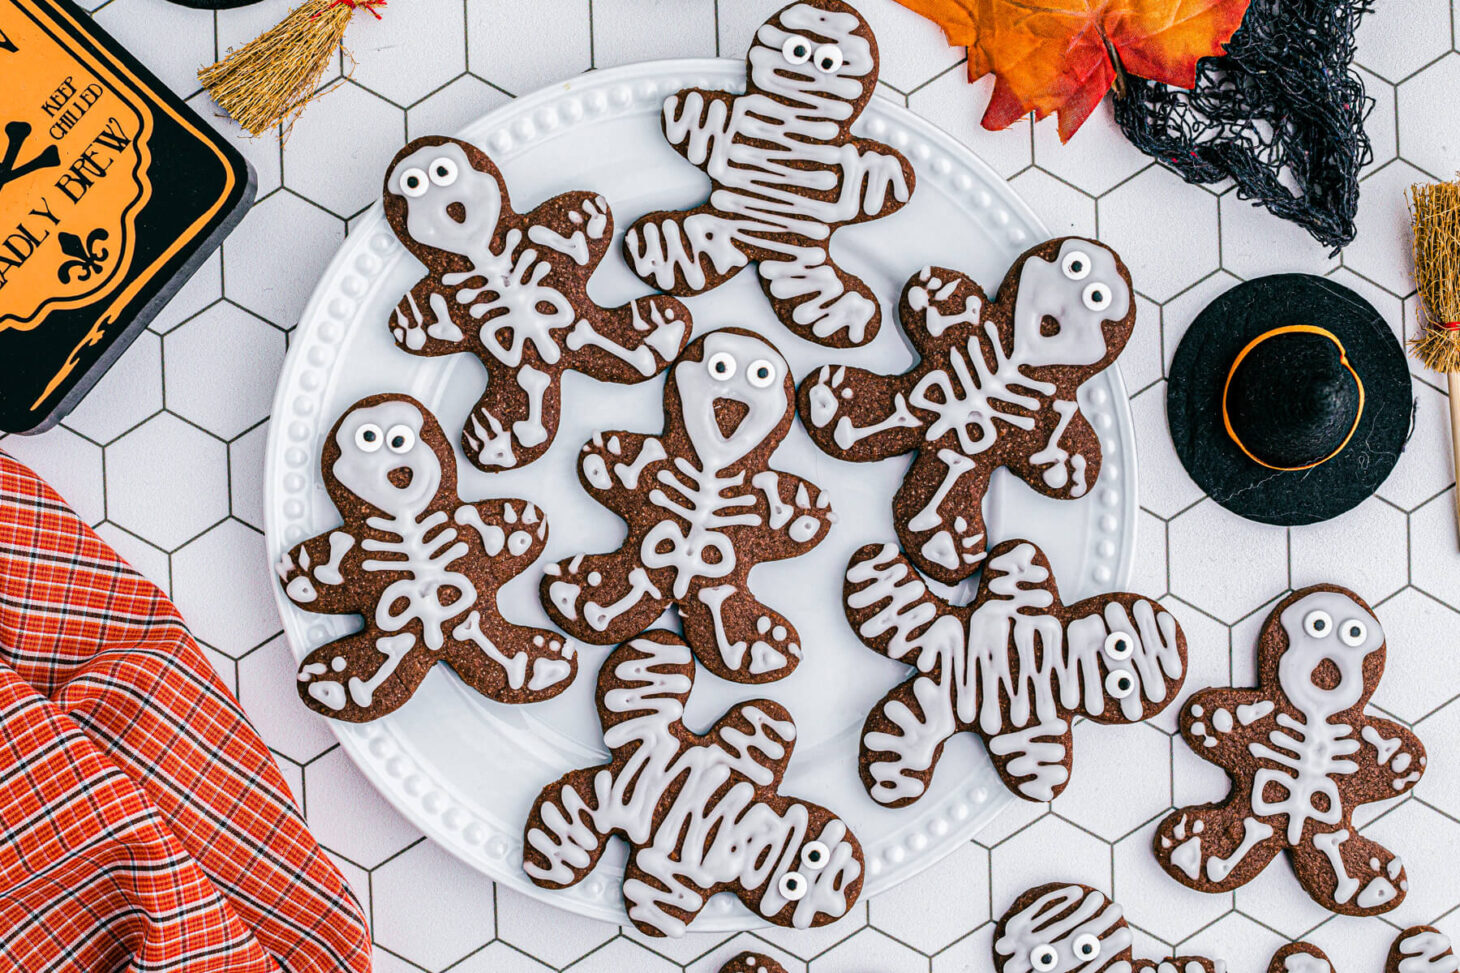 A plate of Chocolate Halloween Sugar Cookies decorated as mummies and skeletons.